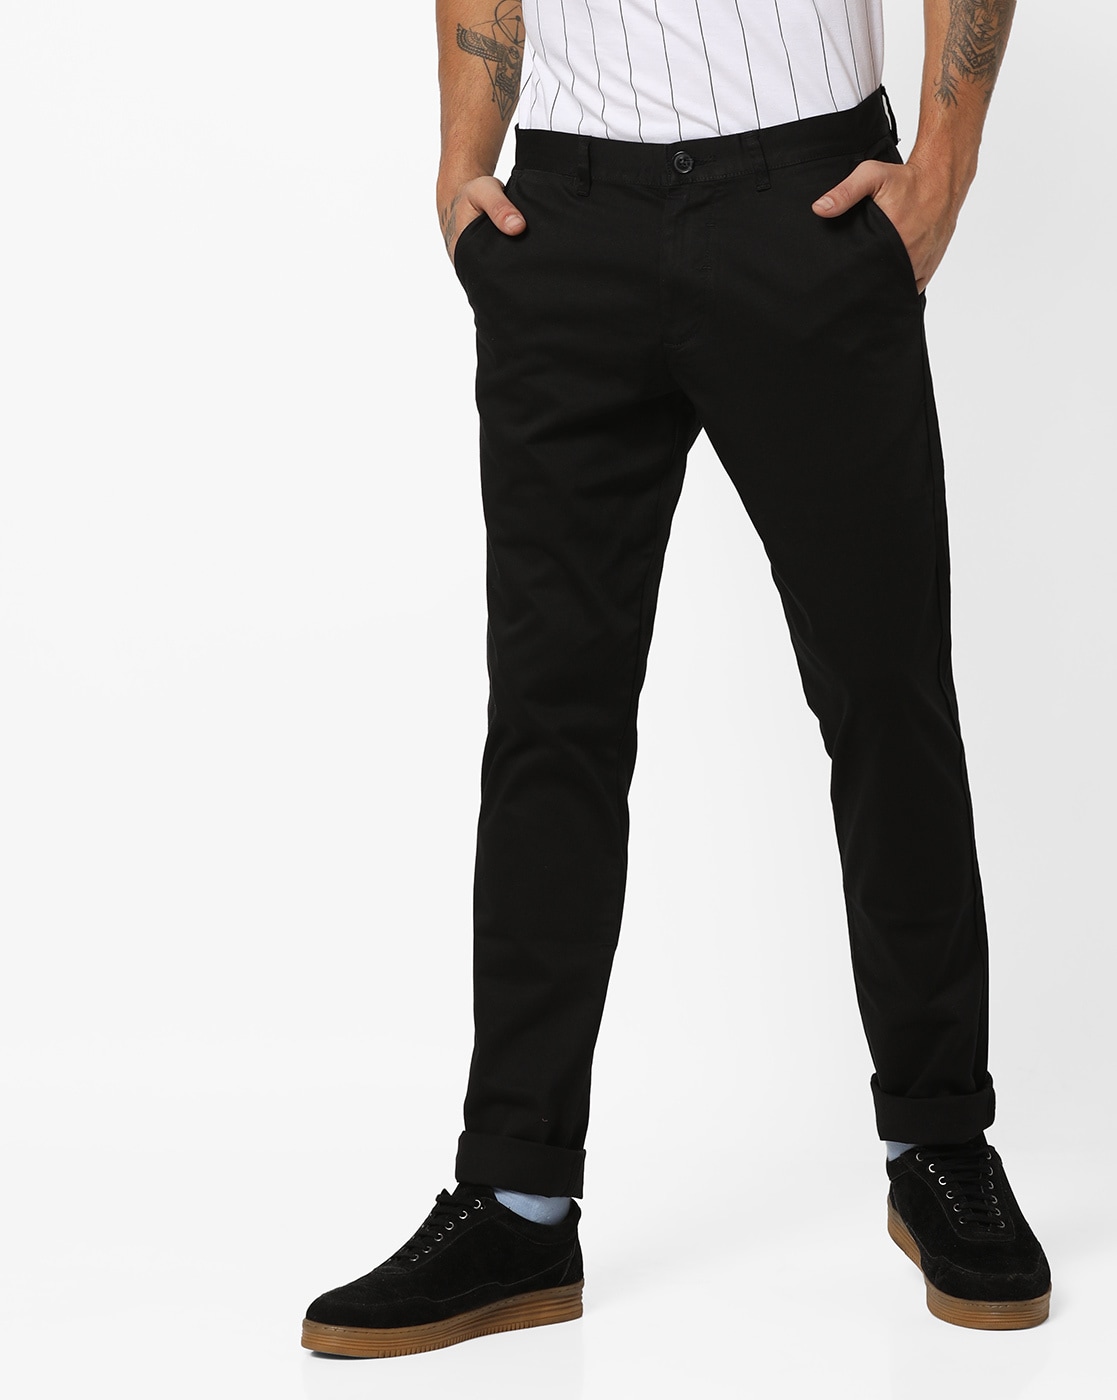 Peter England Mens Trousers  Buy Peter England Mens Trousers Online at  Best Prices In India  Flipkartcom